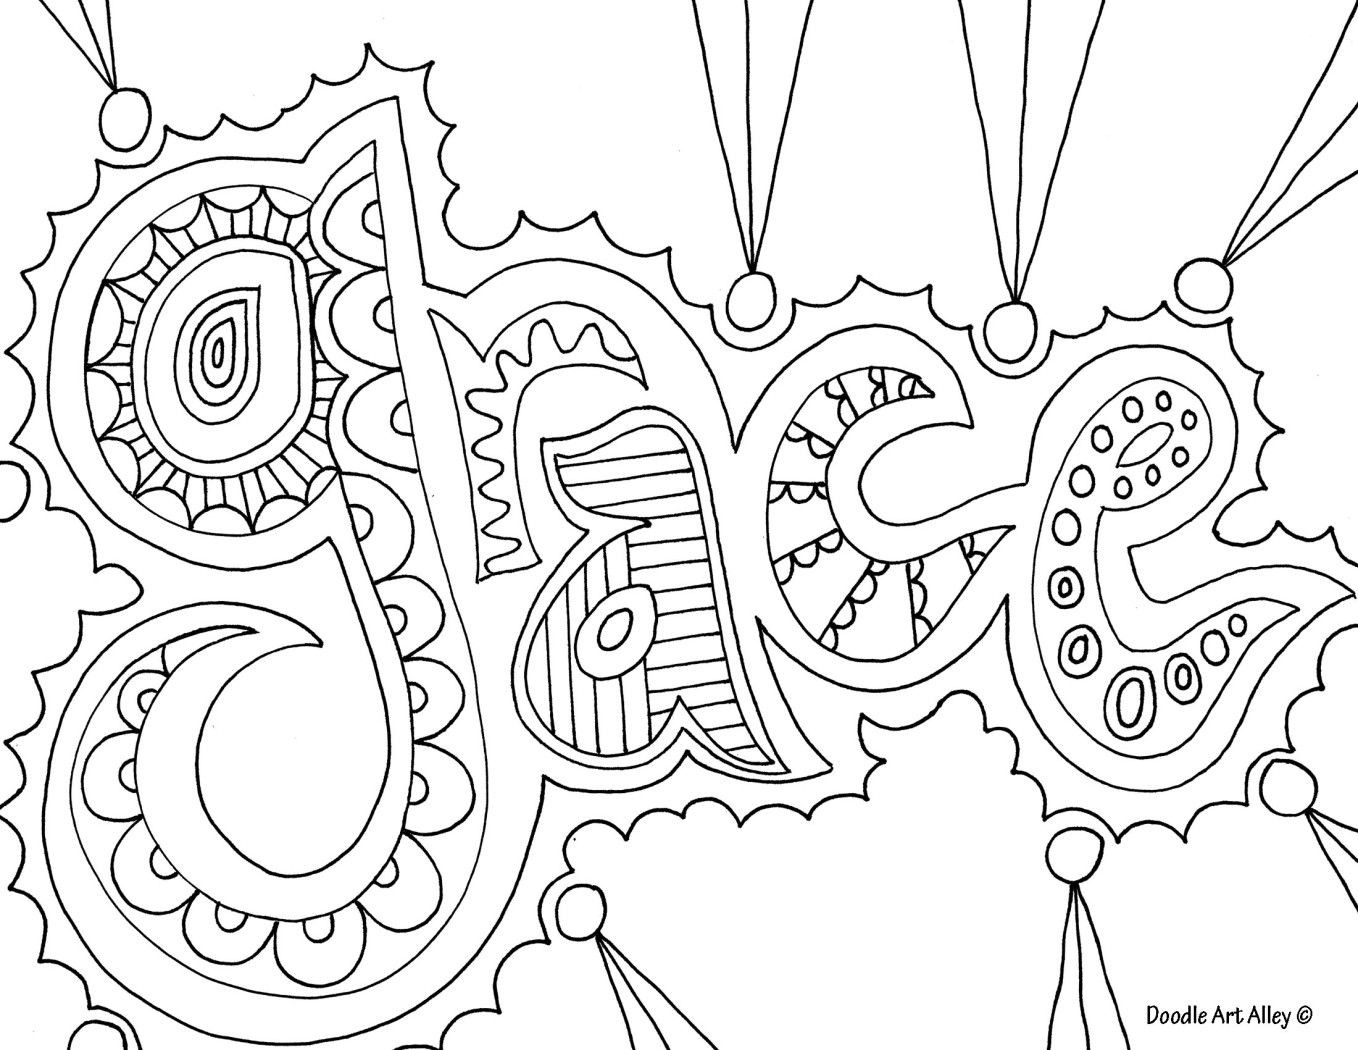 Word Coloring Pages For Kids
 Doodle art grace nice coloring page for older kids